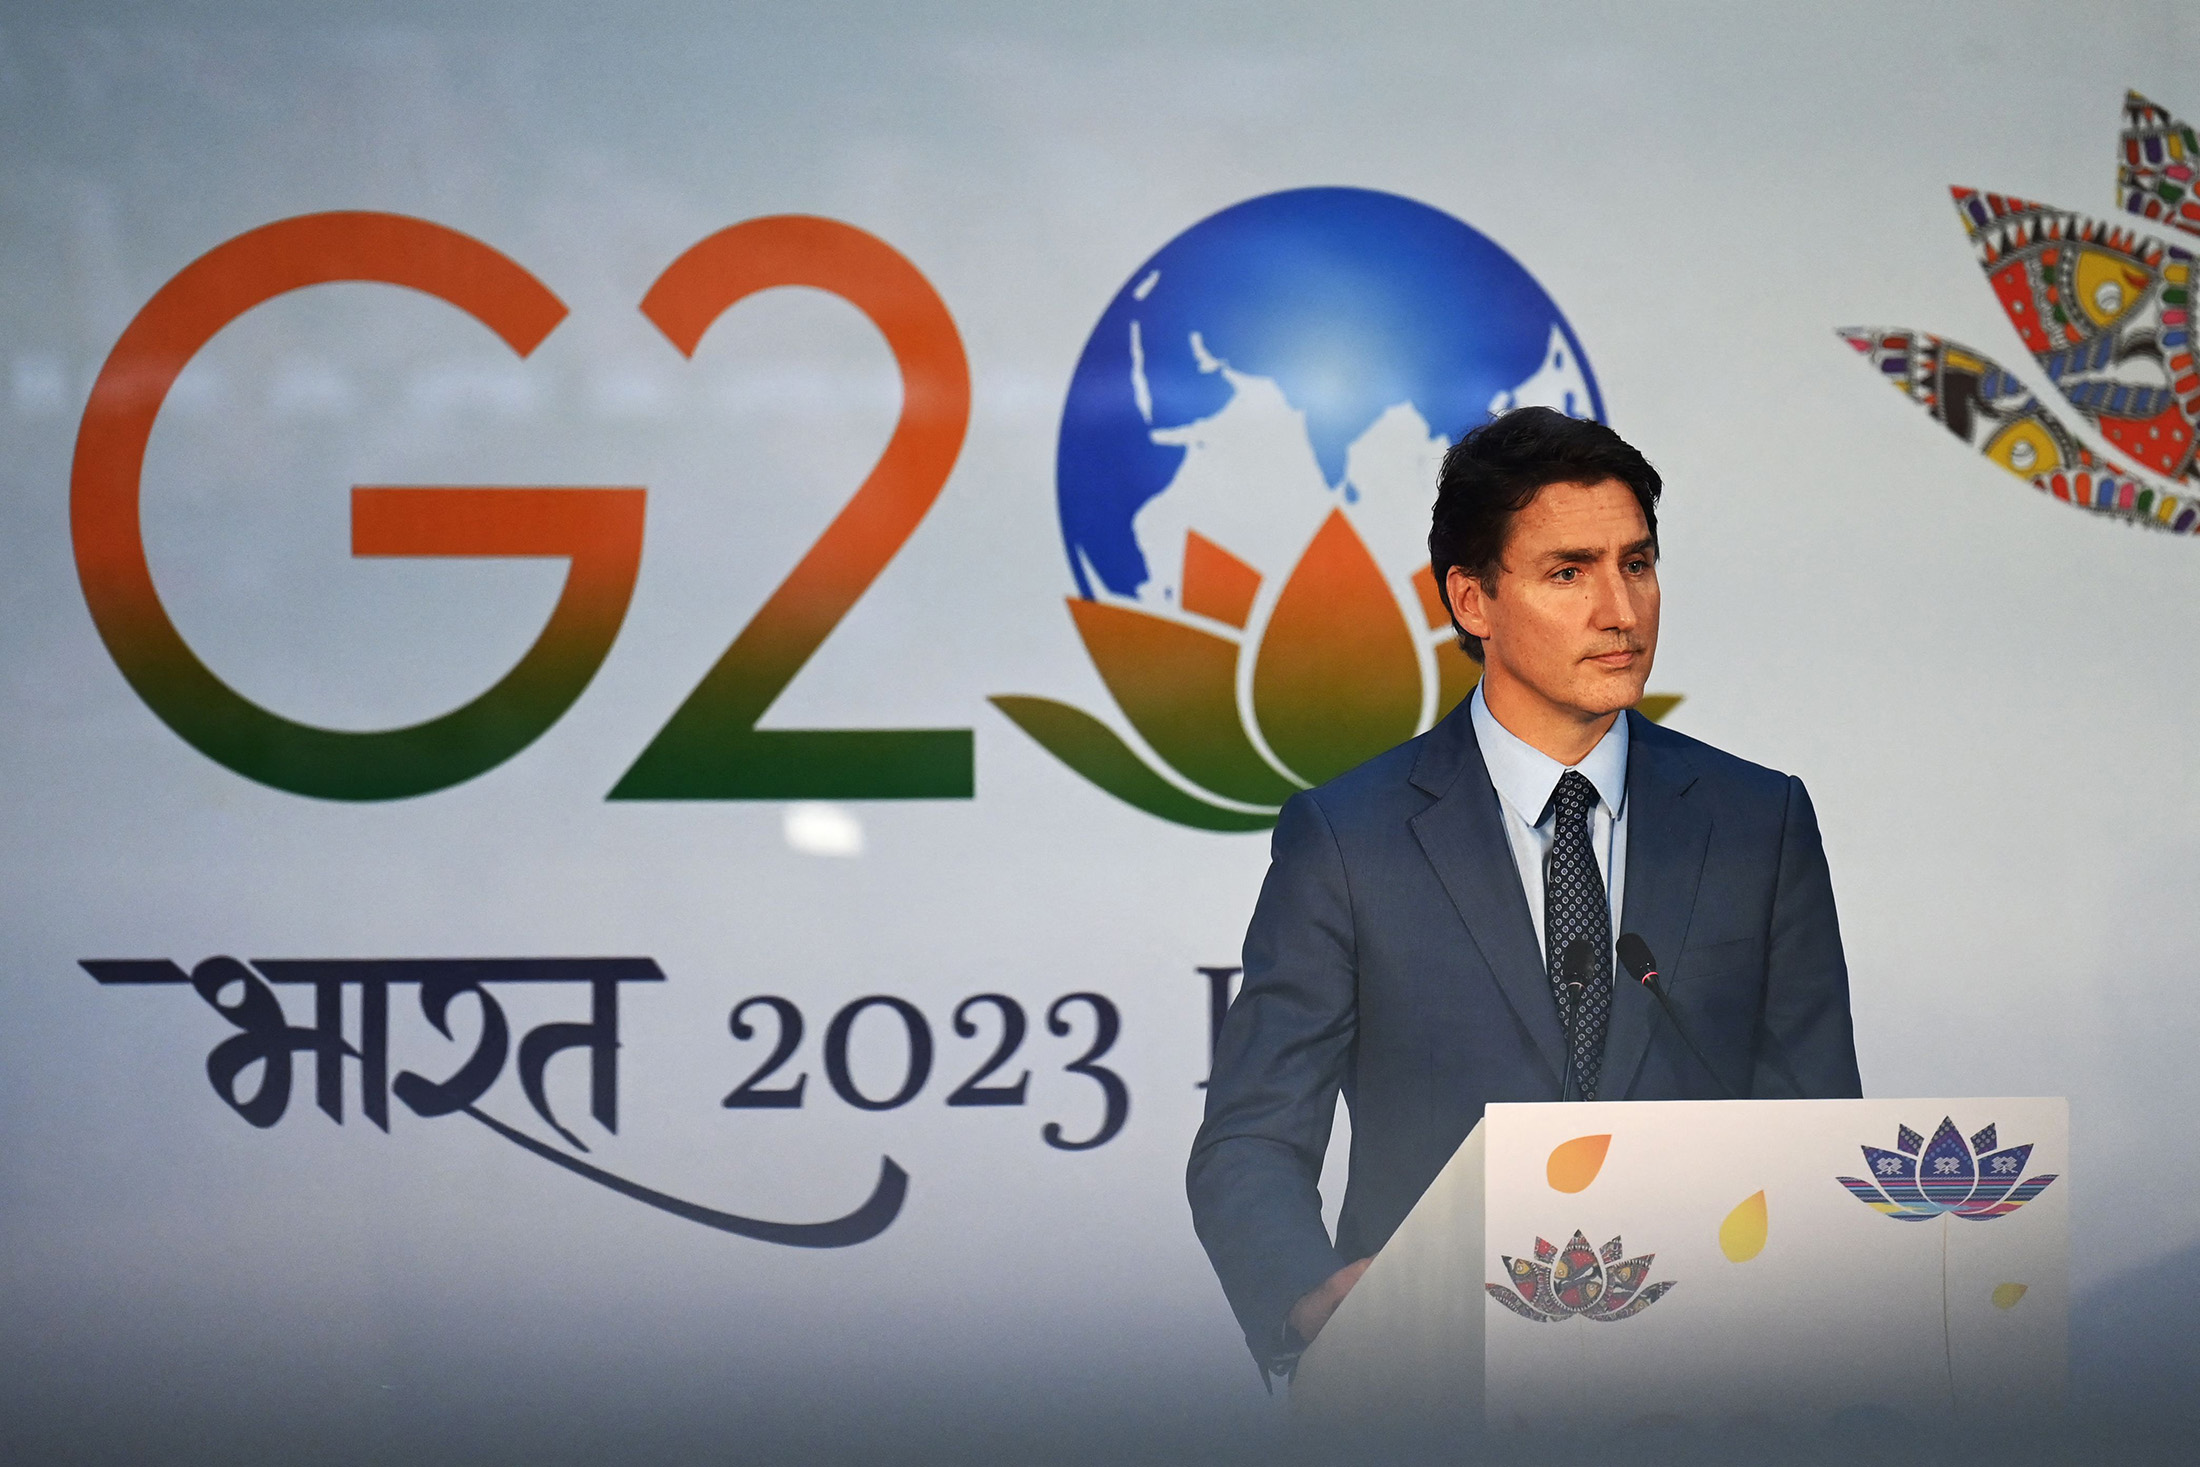 Trudeau attends a press conference after the closing session of the G20 summit in New Delhi on Sept. 10.